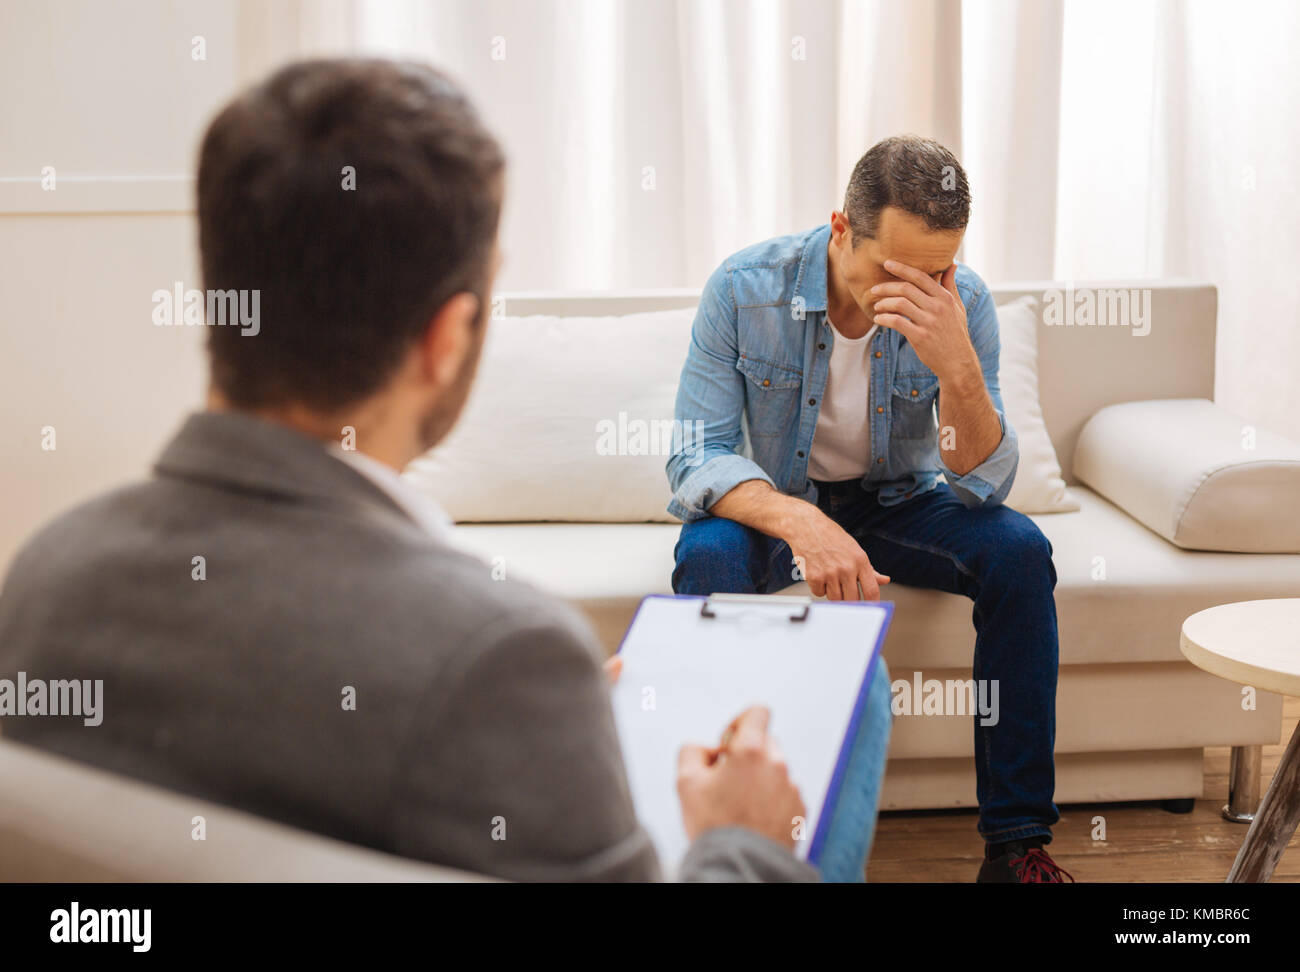 Unhappy  male patient understands his phycological problems Stock Photo